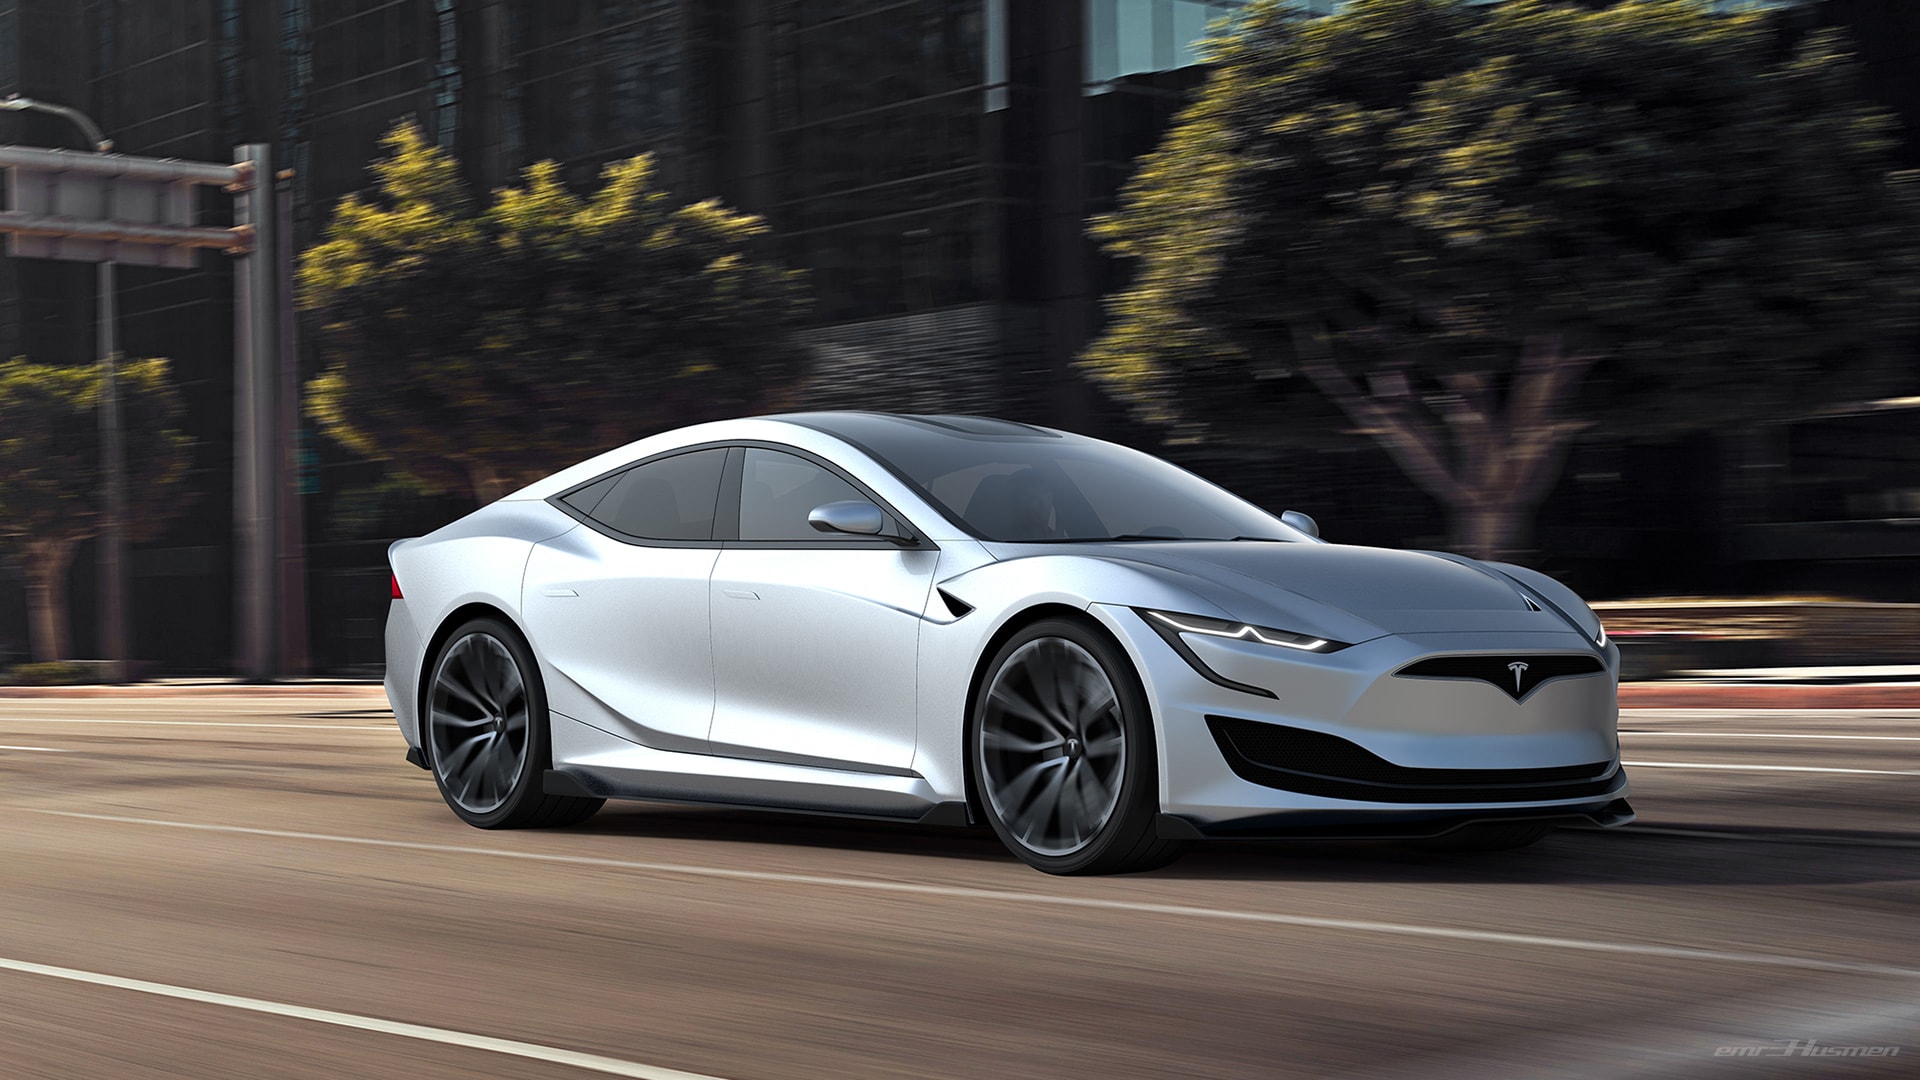 New Tesla Model S Rendered With Sporty Exterior Ahead of Rumored Debut